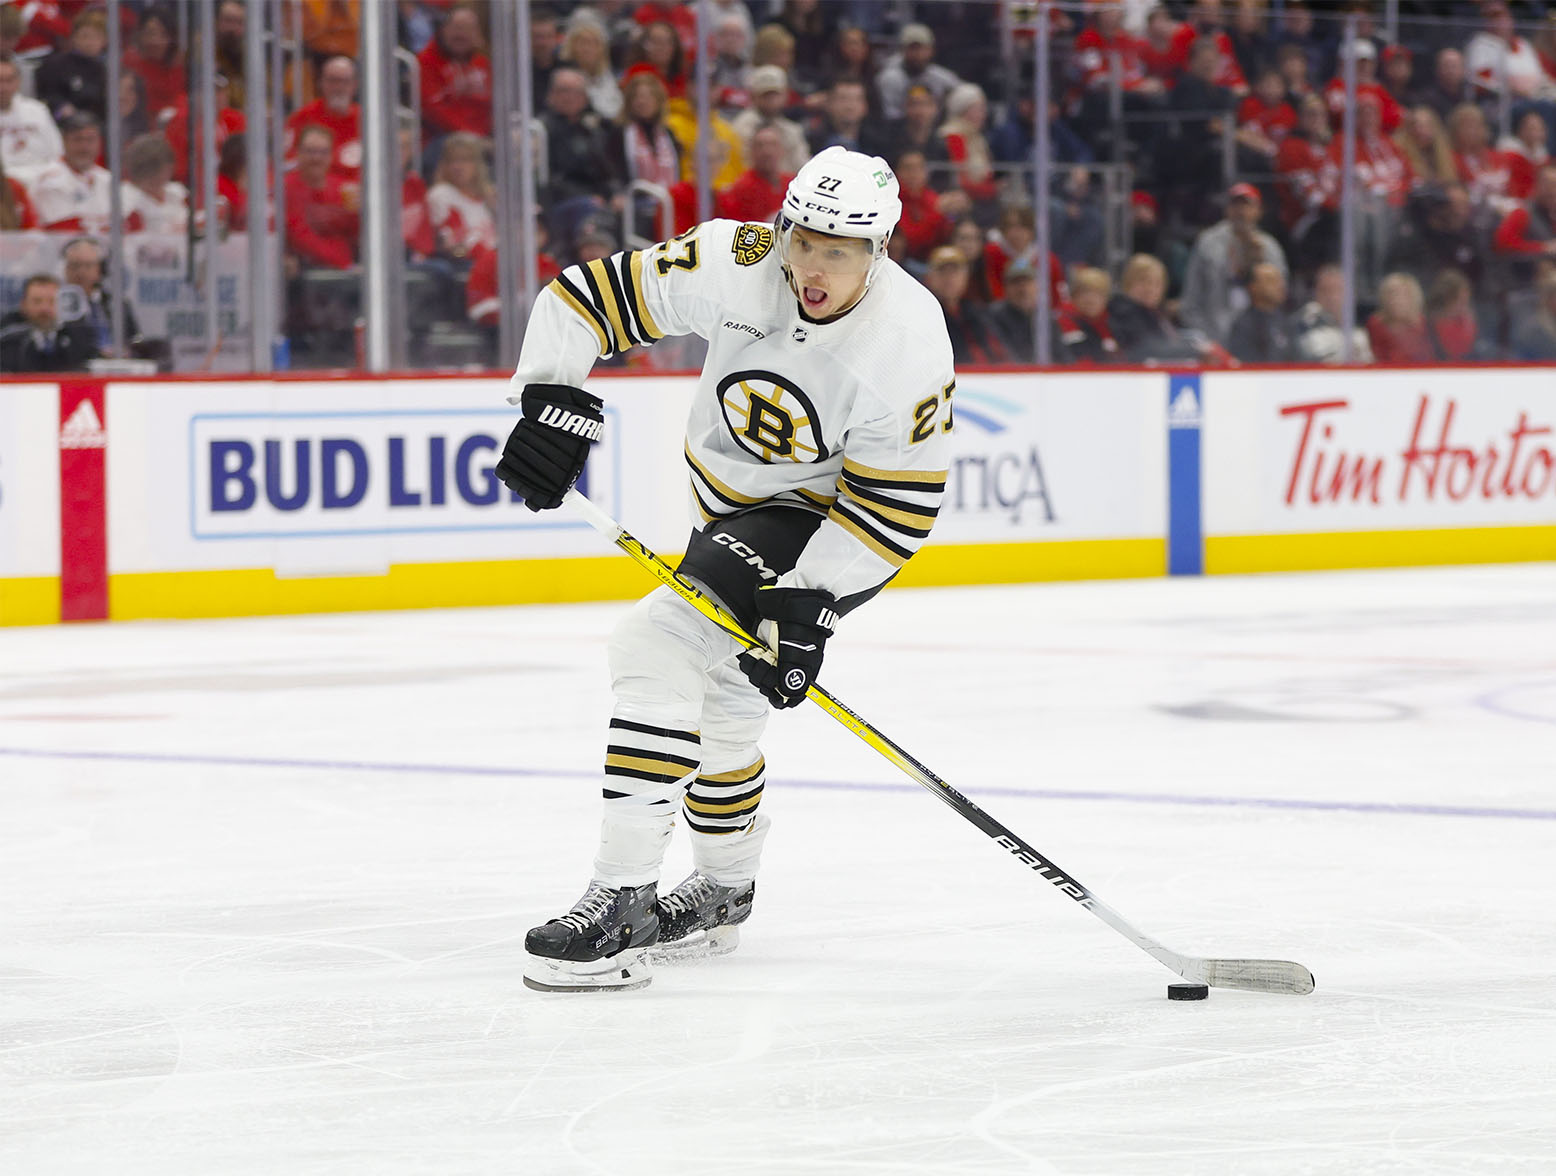 Dec 31, 2023; Detroit, Michigan, USA; Boston Bruins defenseman Hampus Lindholm (27) handles the puck during the first period of the game between the Boston Bruins and the Detroit Red Wings at Little Caesars Arena. Mandatory Credit: Brian Bradshaw Sevald-USA TODAY Sports